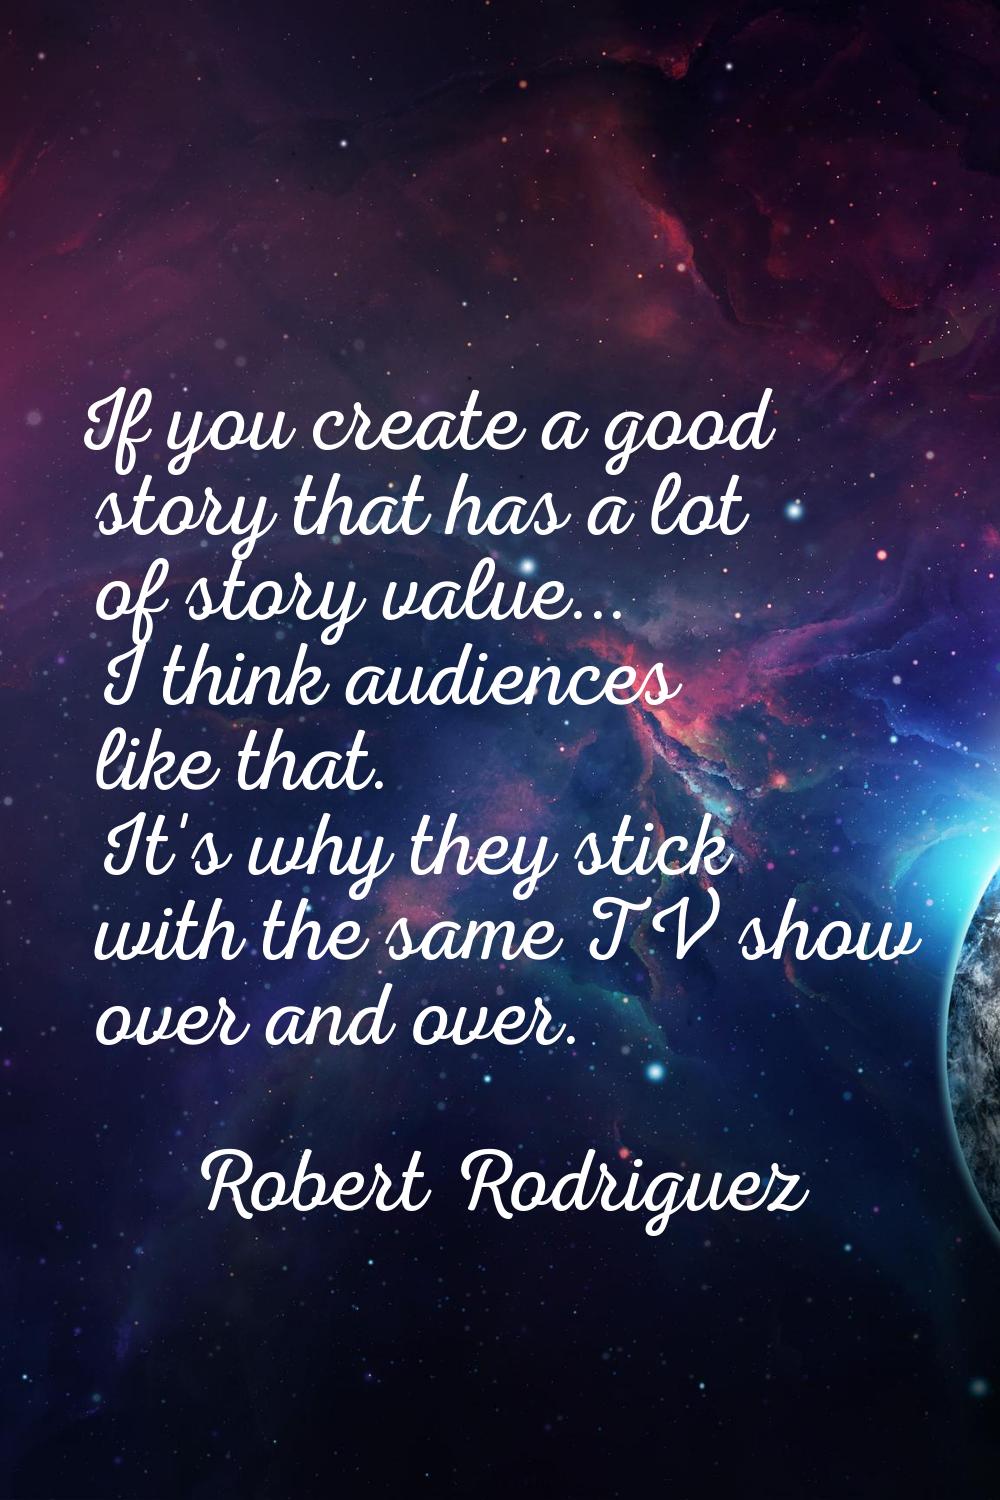 If you create a good story that has a lot of story value... I think audiences like that. It's why t